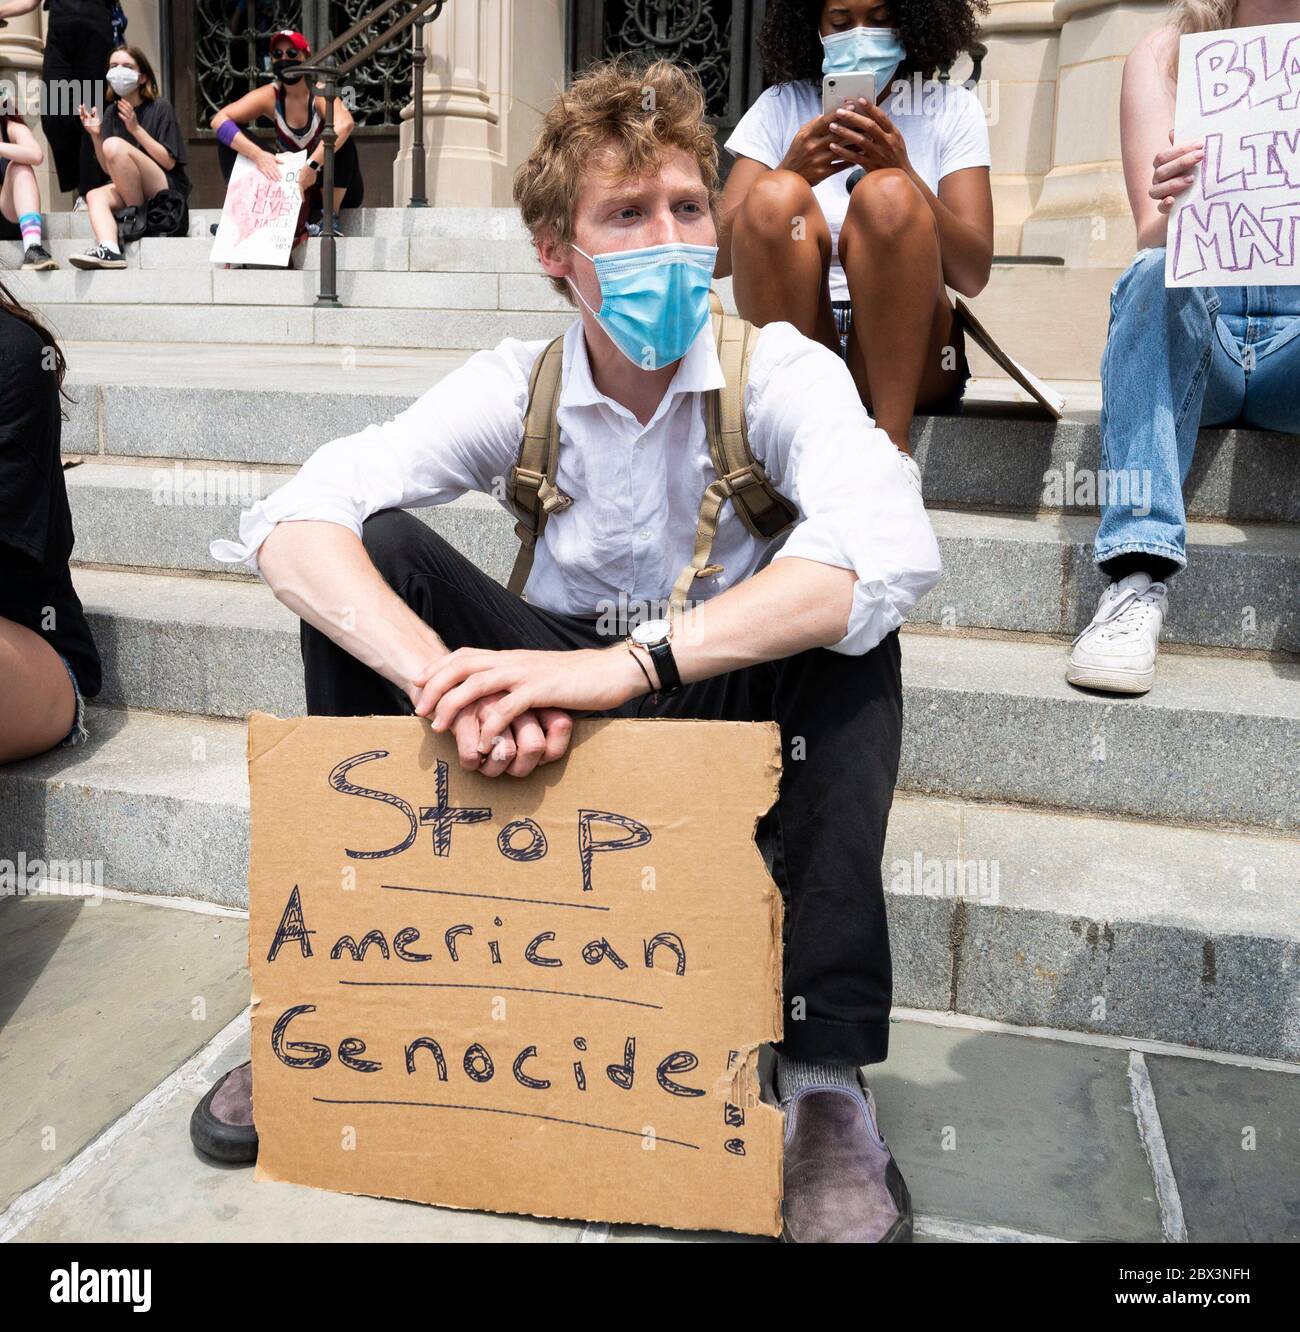 Washington, DC, USA. 4th June, 2020. June 4, 2020 - Washington, DC, United States: Man with ''Stop American Genocide!'' sign at a protest supporting Black Lives Matter at the National Cathedral. Credit: Michael Brochstein/ZUMA Wire/Alamy Live News Stock Photo